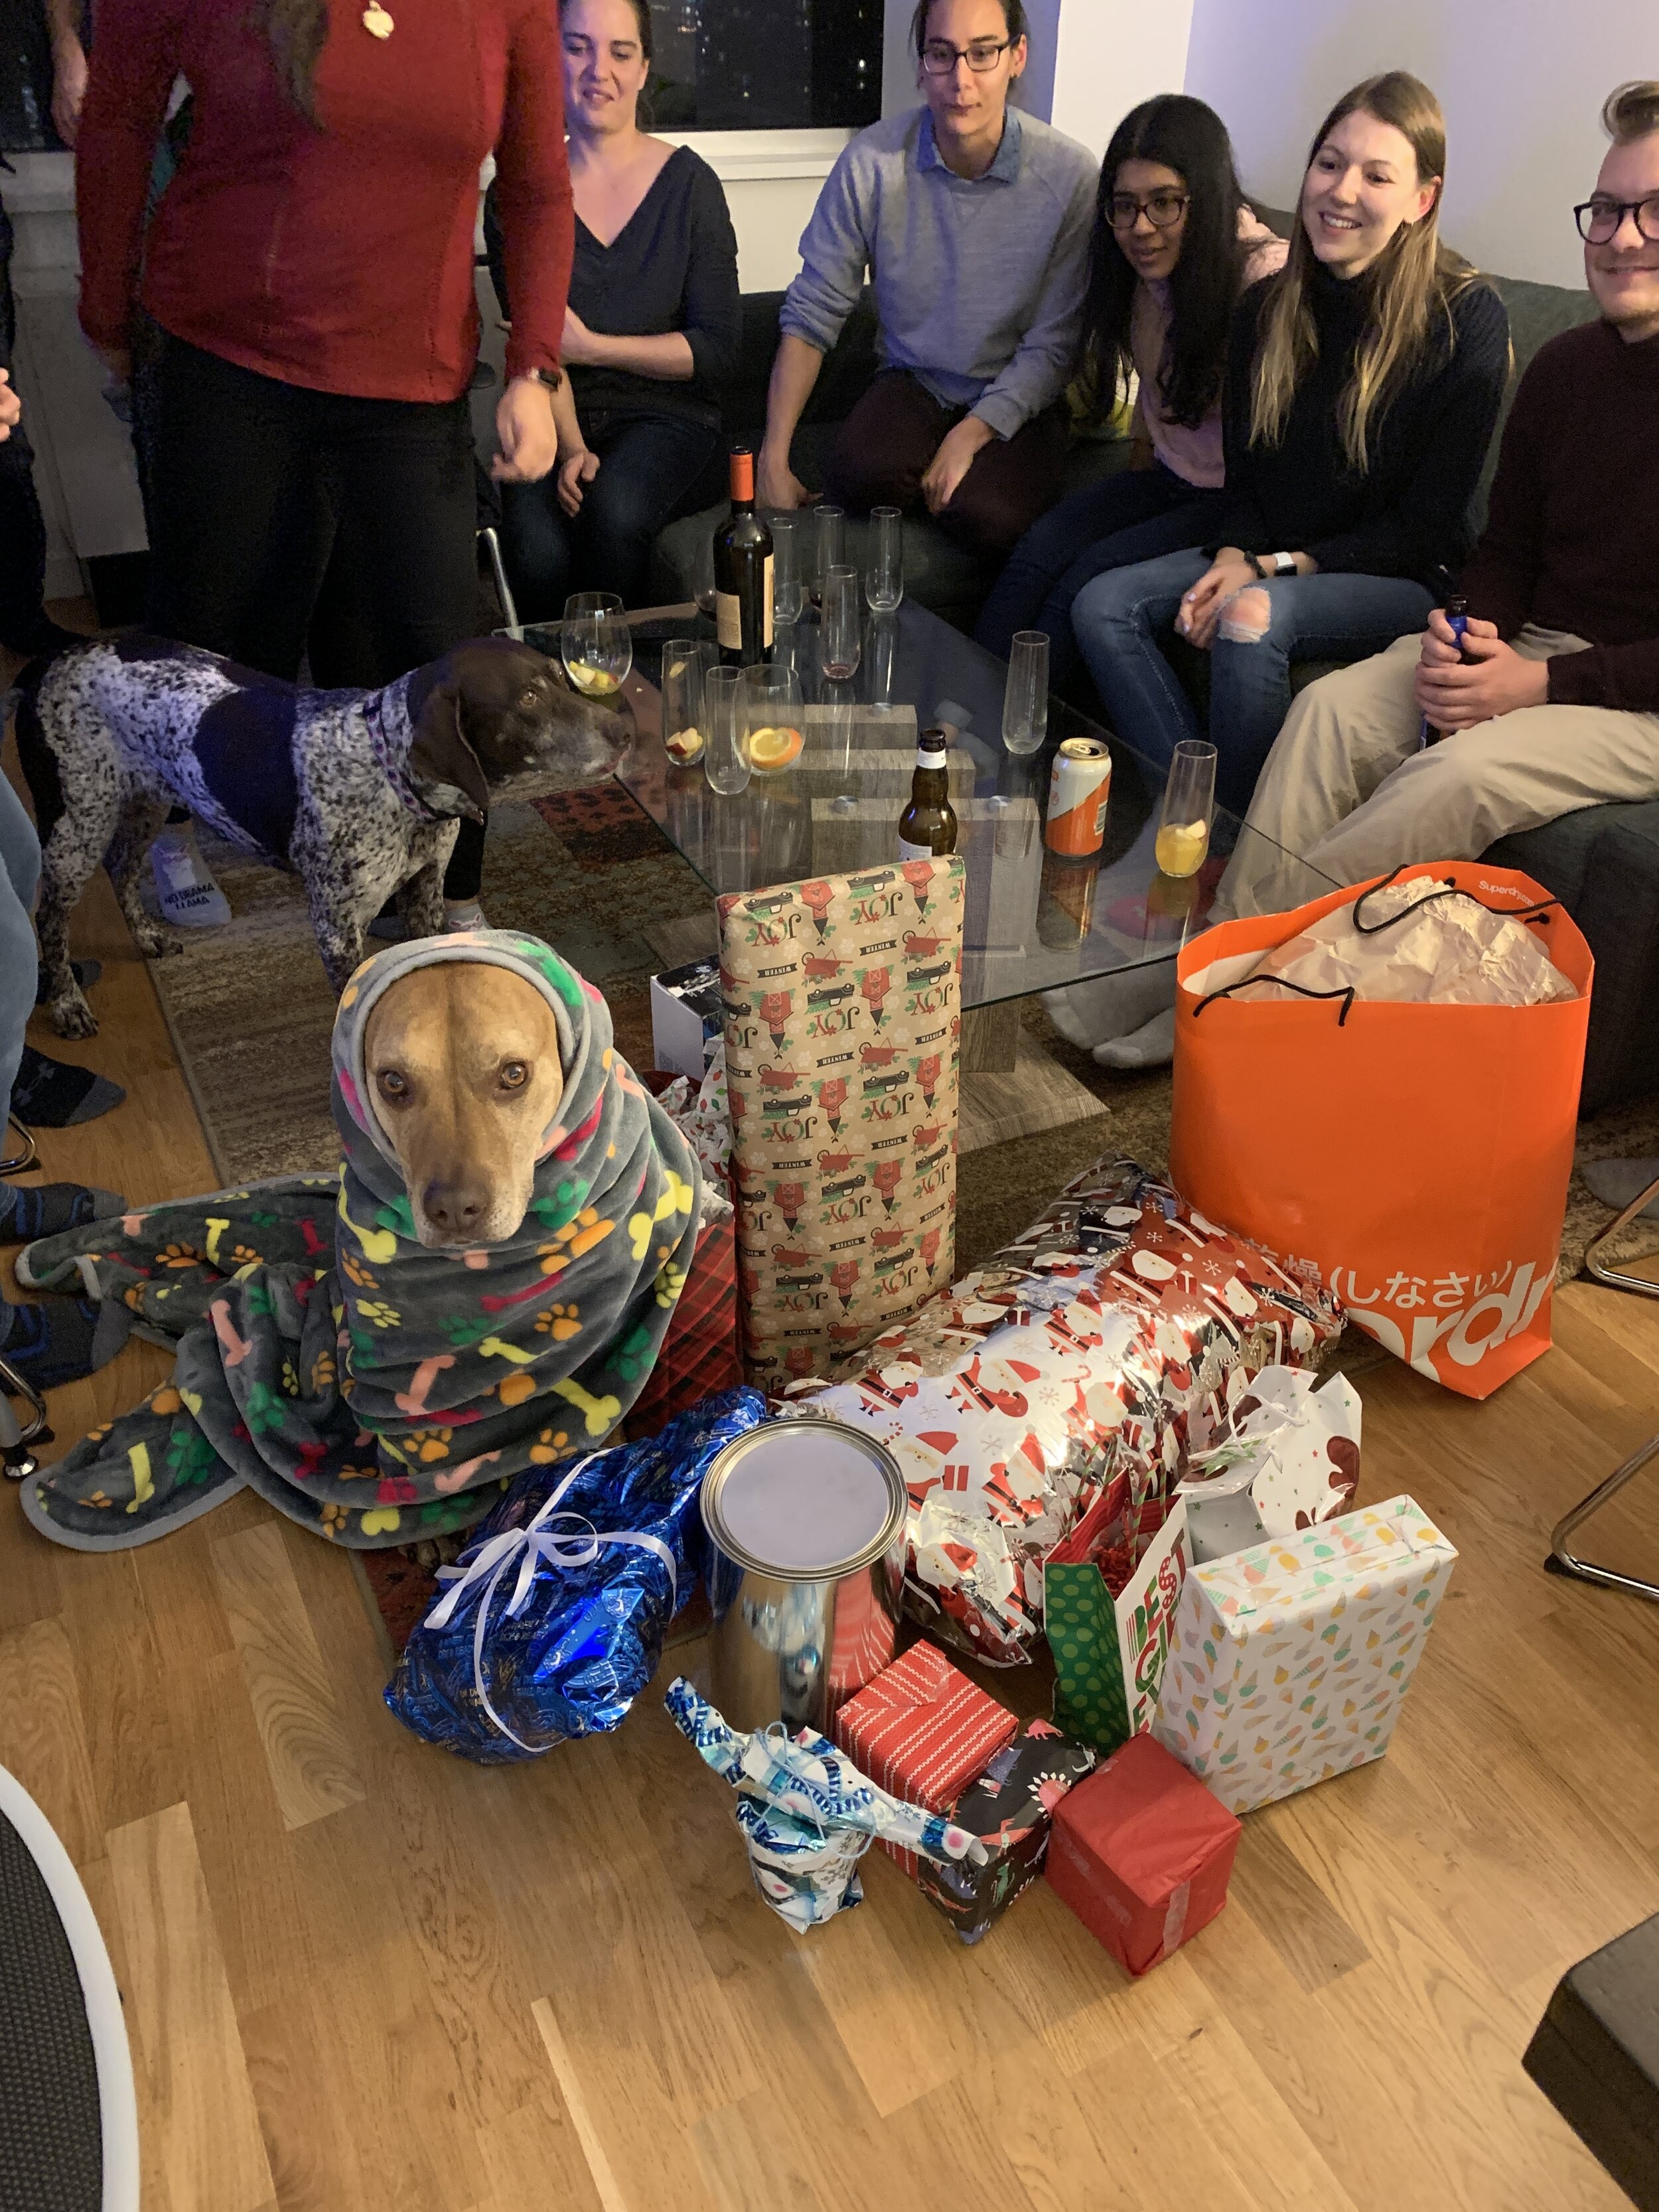 Tonto with all of his presents!